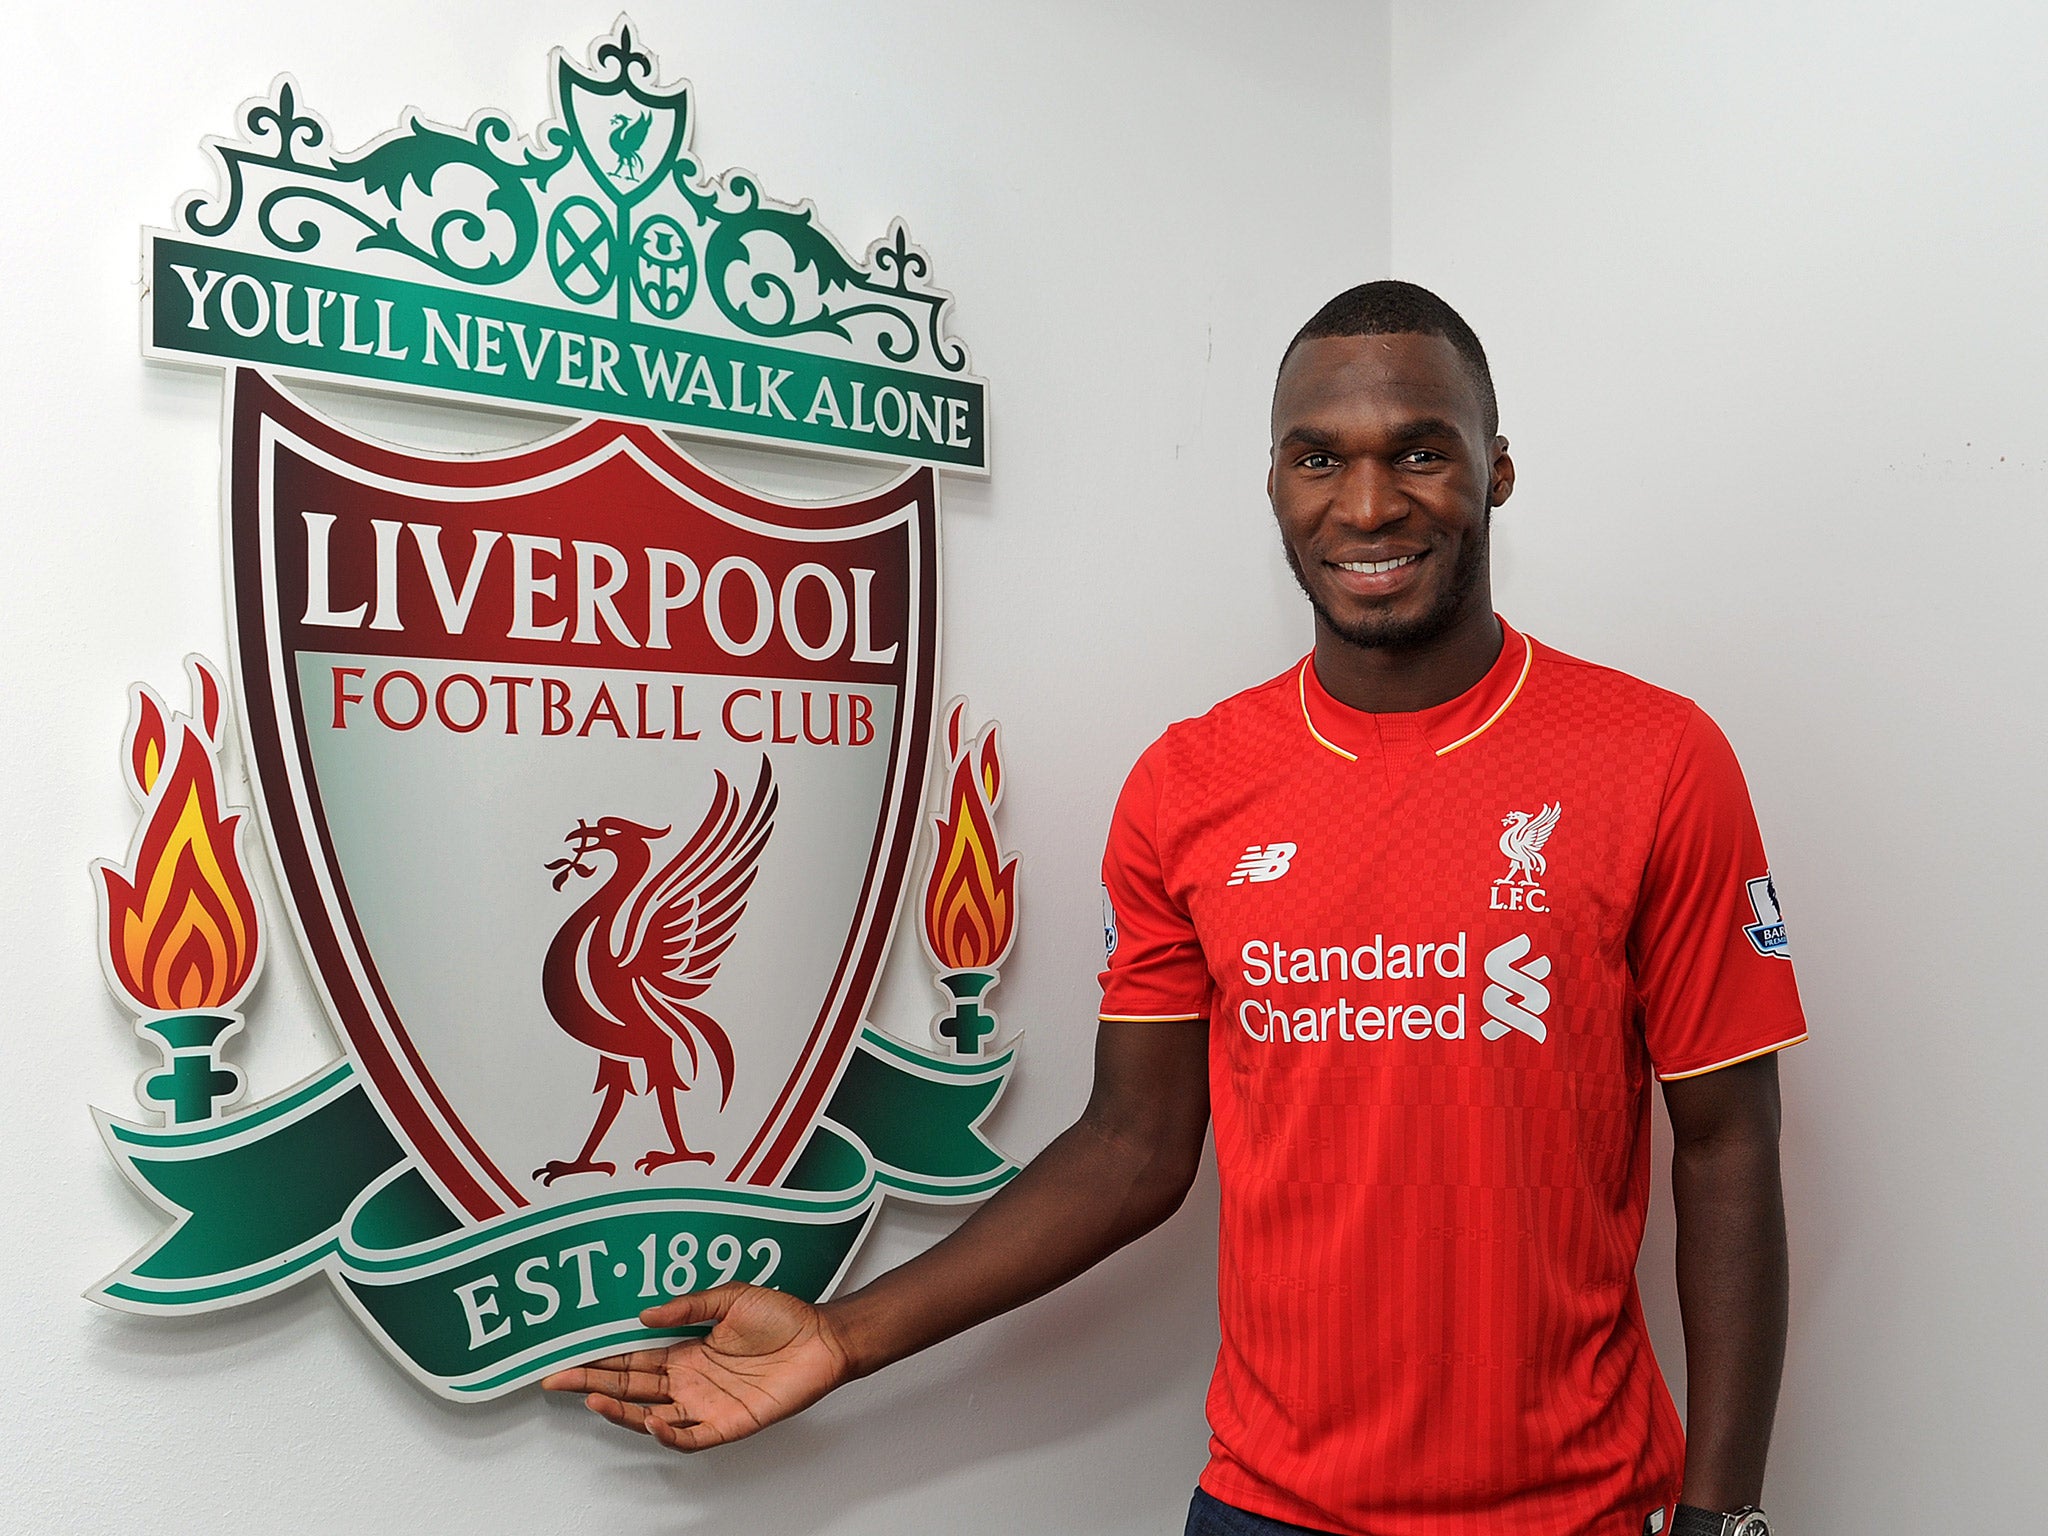 Christian Benteke has completed his £32.5m move